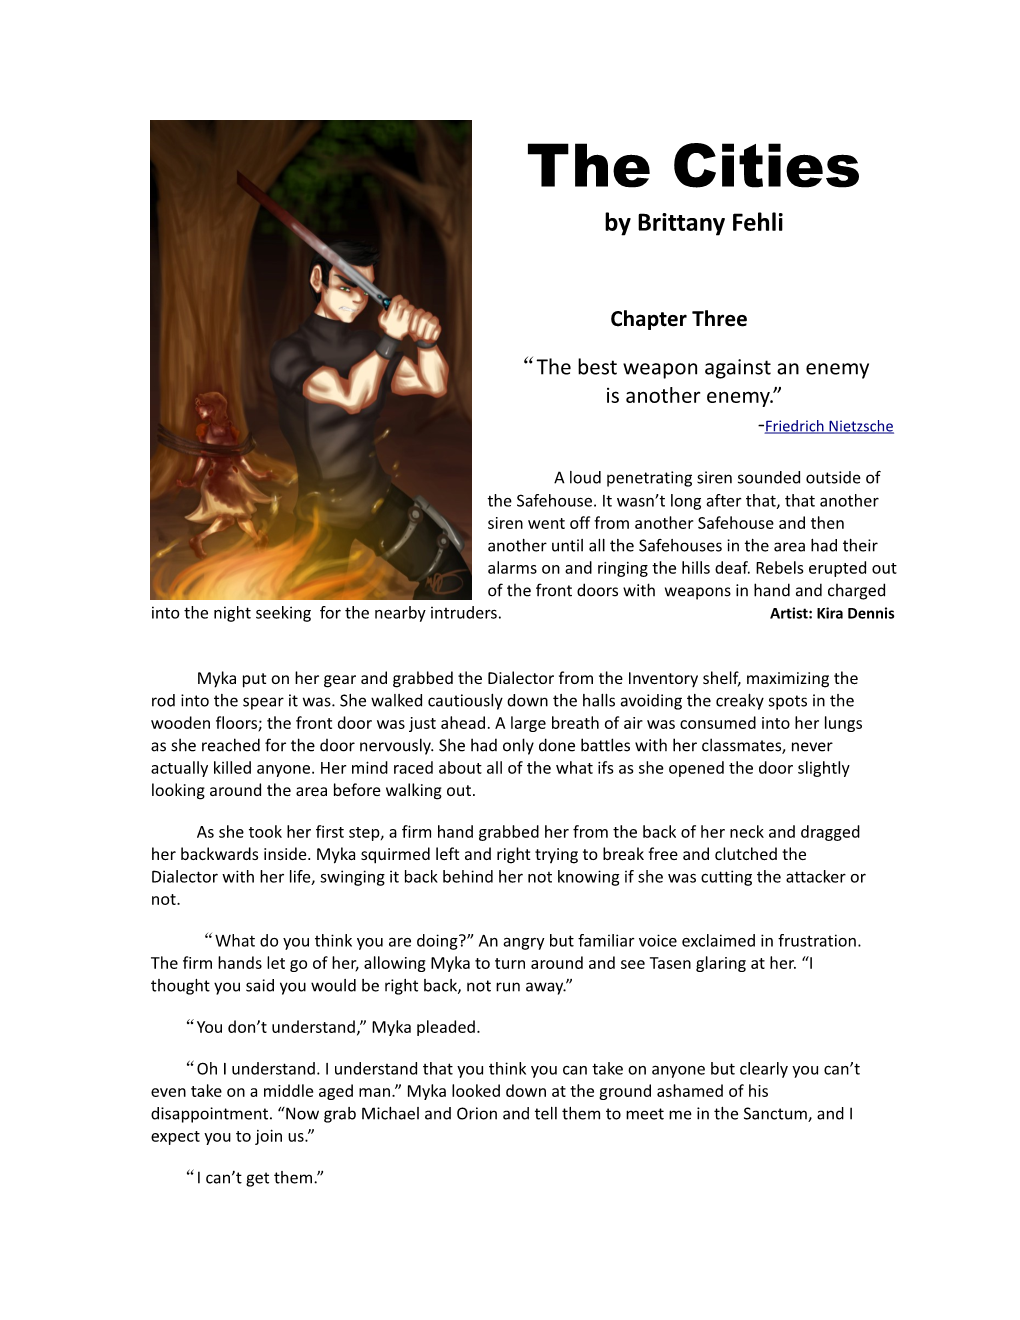 The Cities by Brittany Fehli